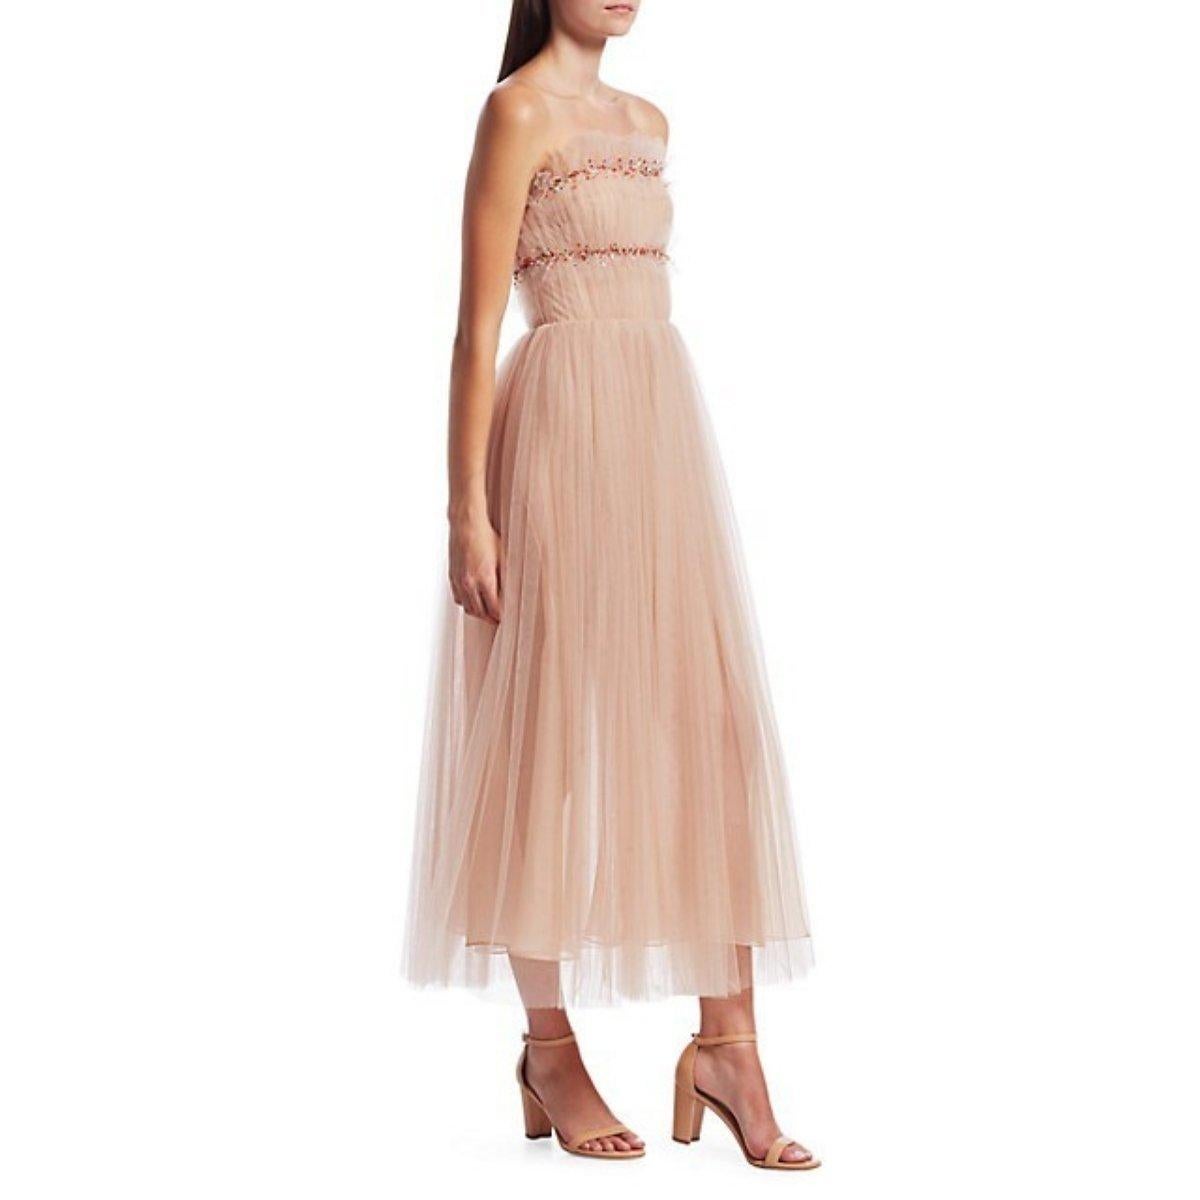 Rainbow-colored sequins illuminate the frilly ruffled bodice of this delightful, full-skirted cocktail dress made from ruched tulle in a winsome pink hue.
Pale pink floaty tulle
Flowy midi skirt
Back zip closure
Strapless
100% polyamide
Lined: